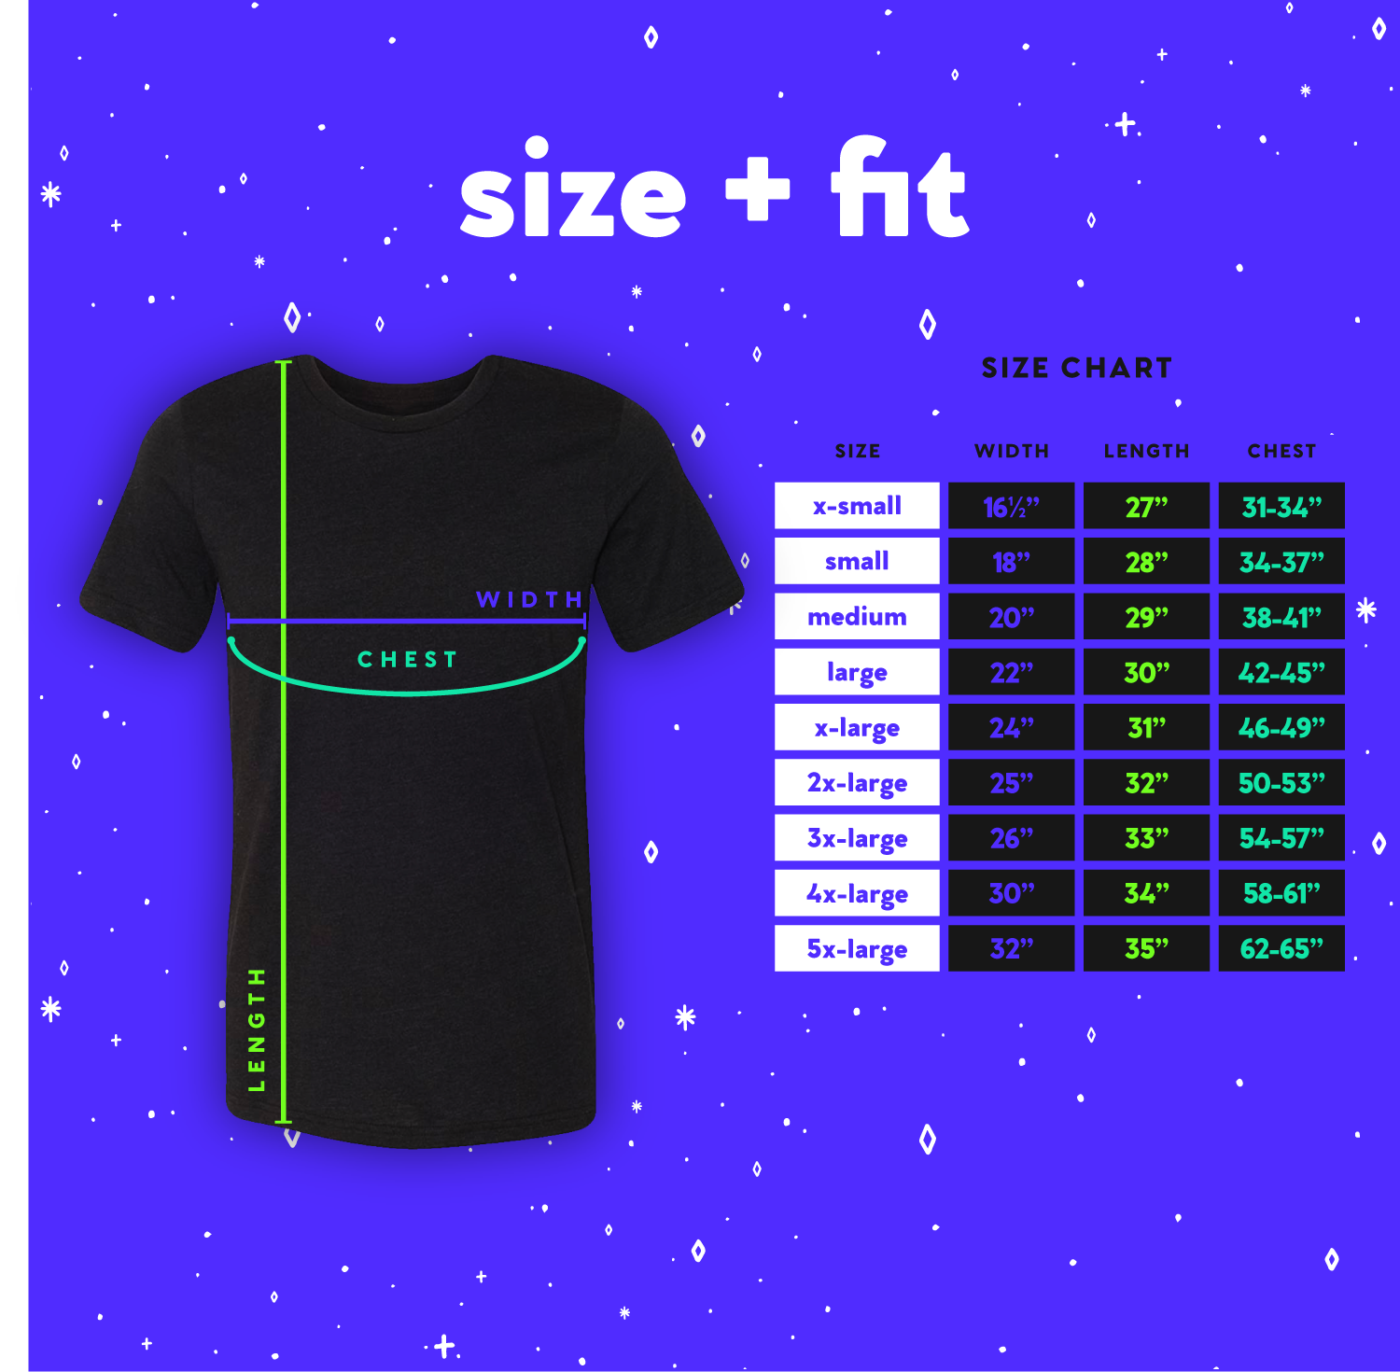 size + fit guide